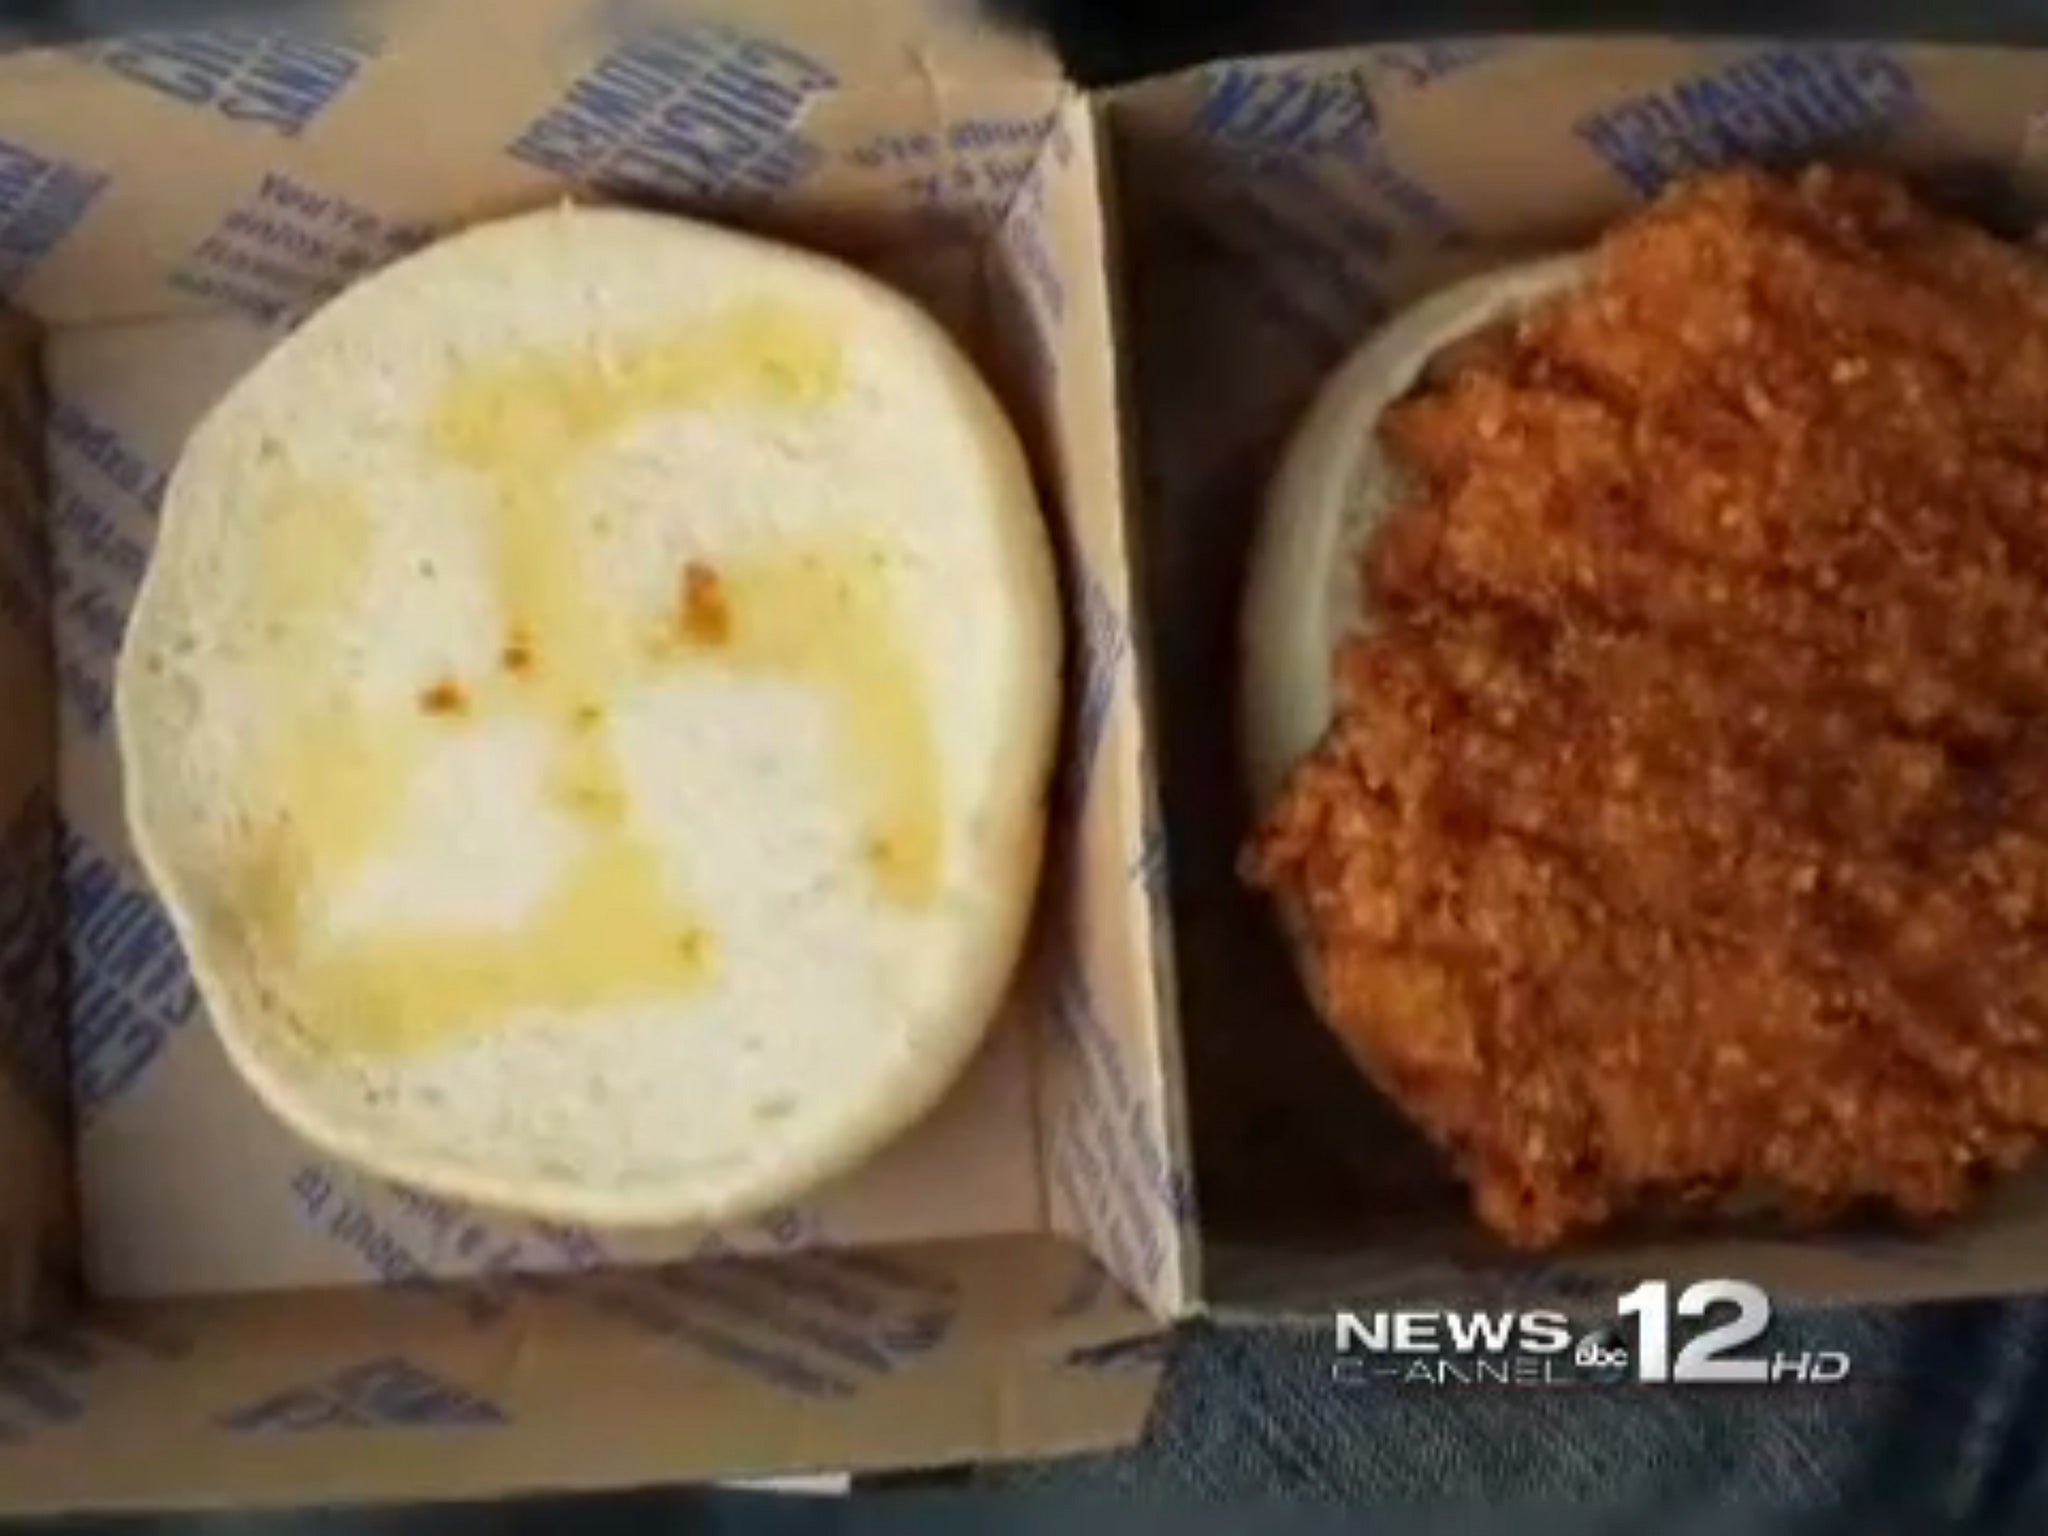 This screengrab from WCTI TV shows the swastika etched into the bun with butter